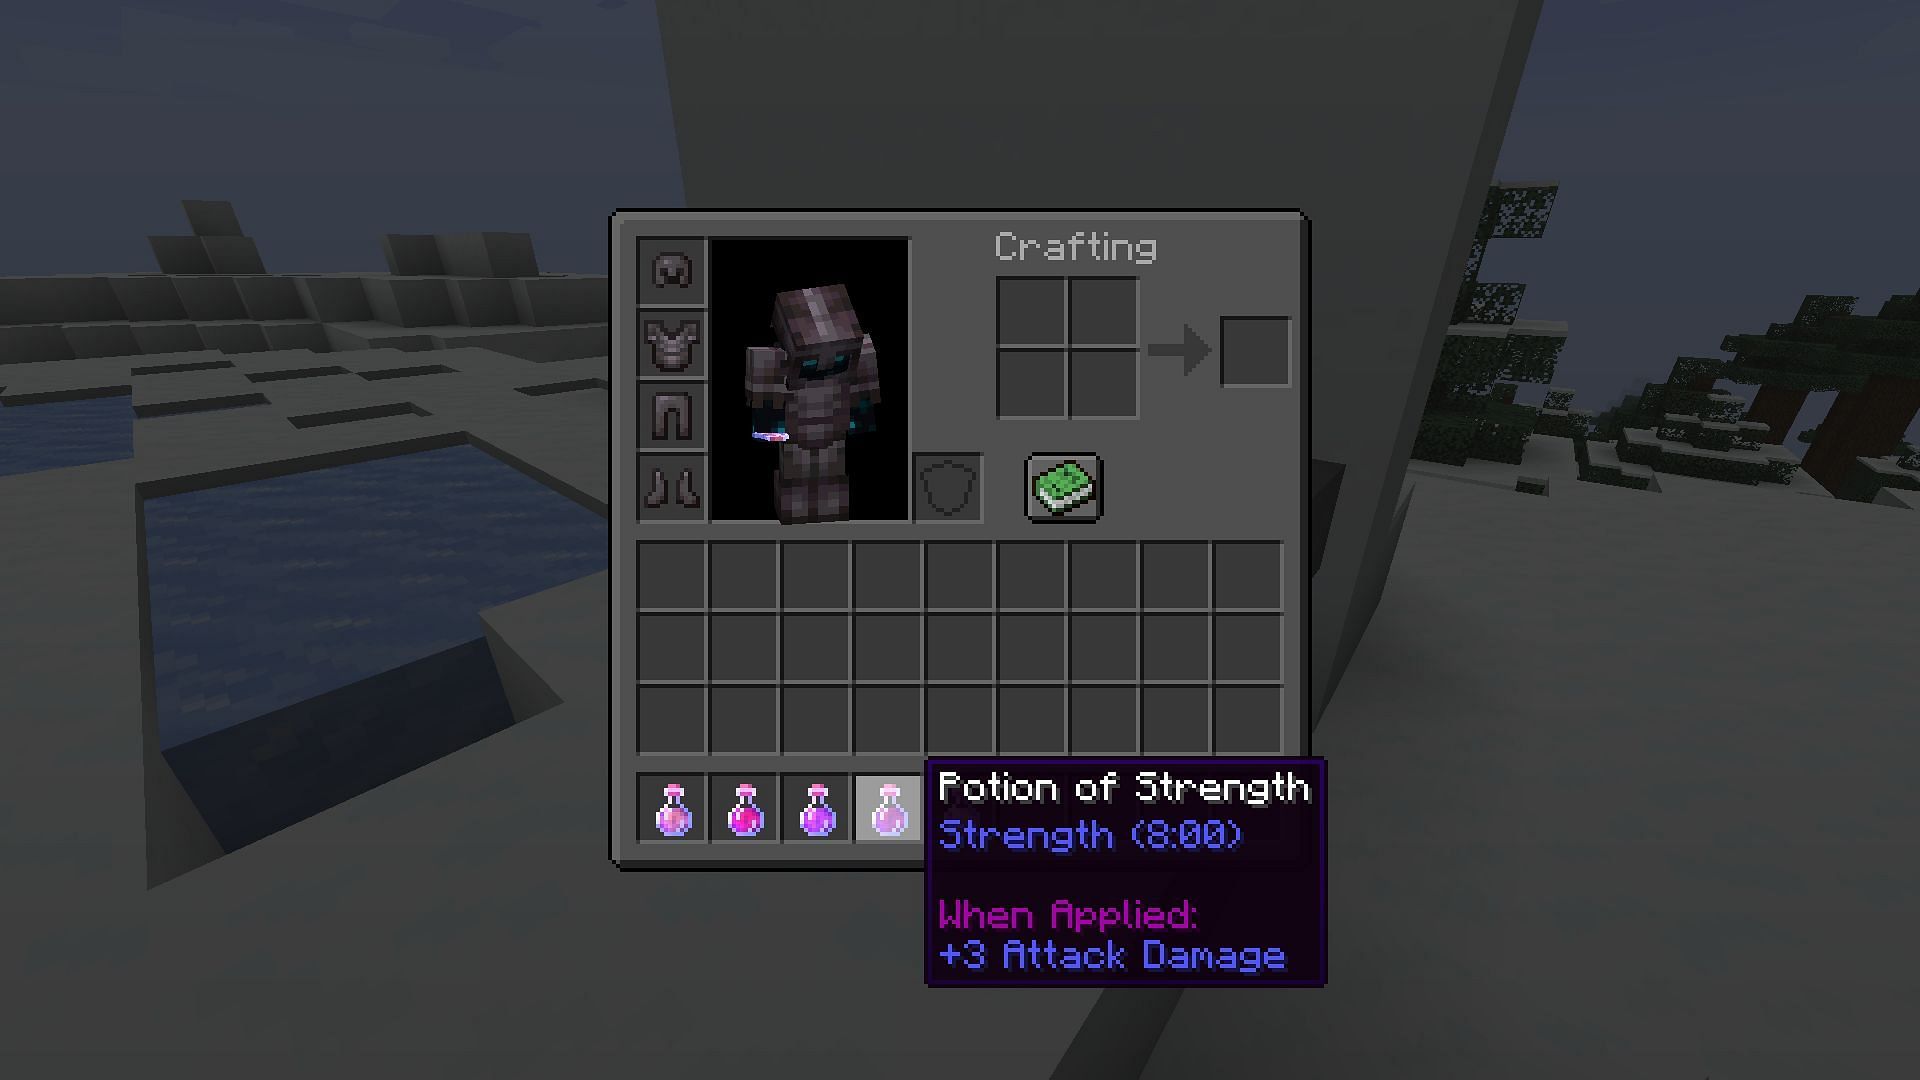 Potion of strength increases melee attack strength in Minecraft (Image via Mojang)